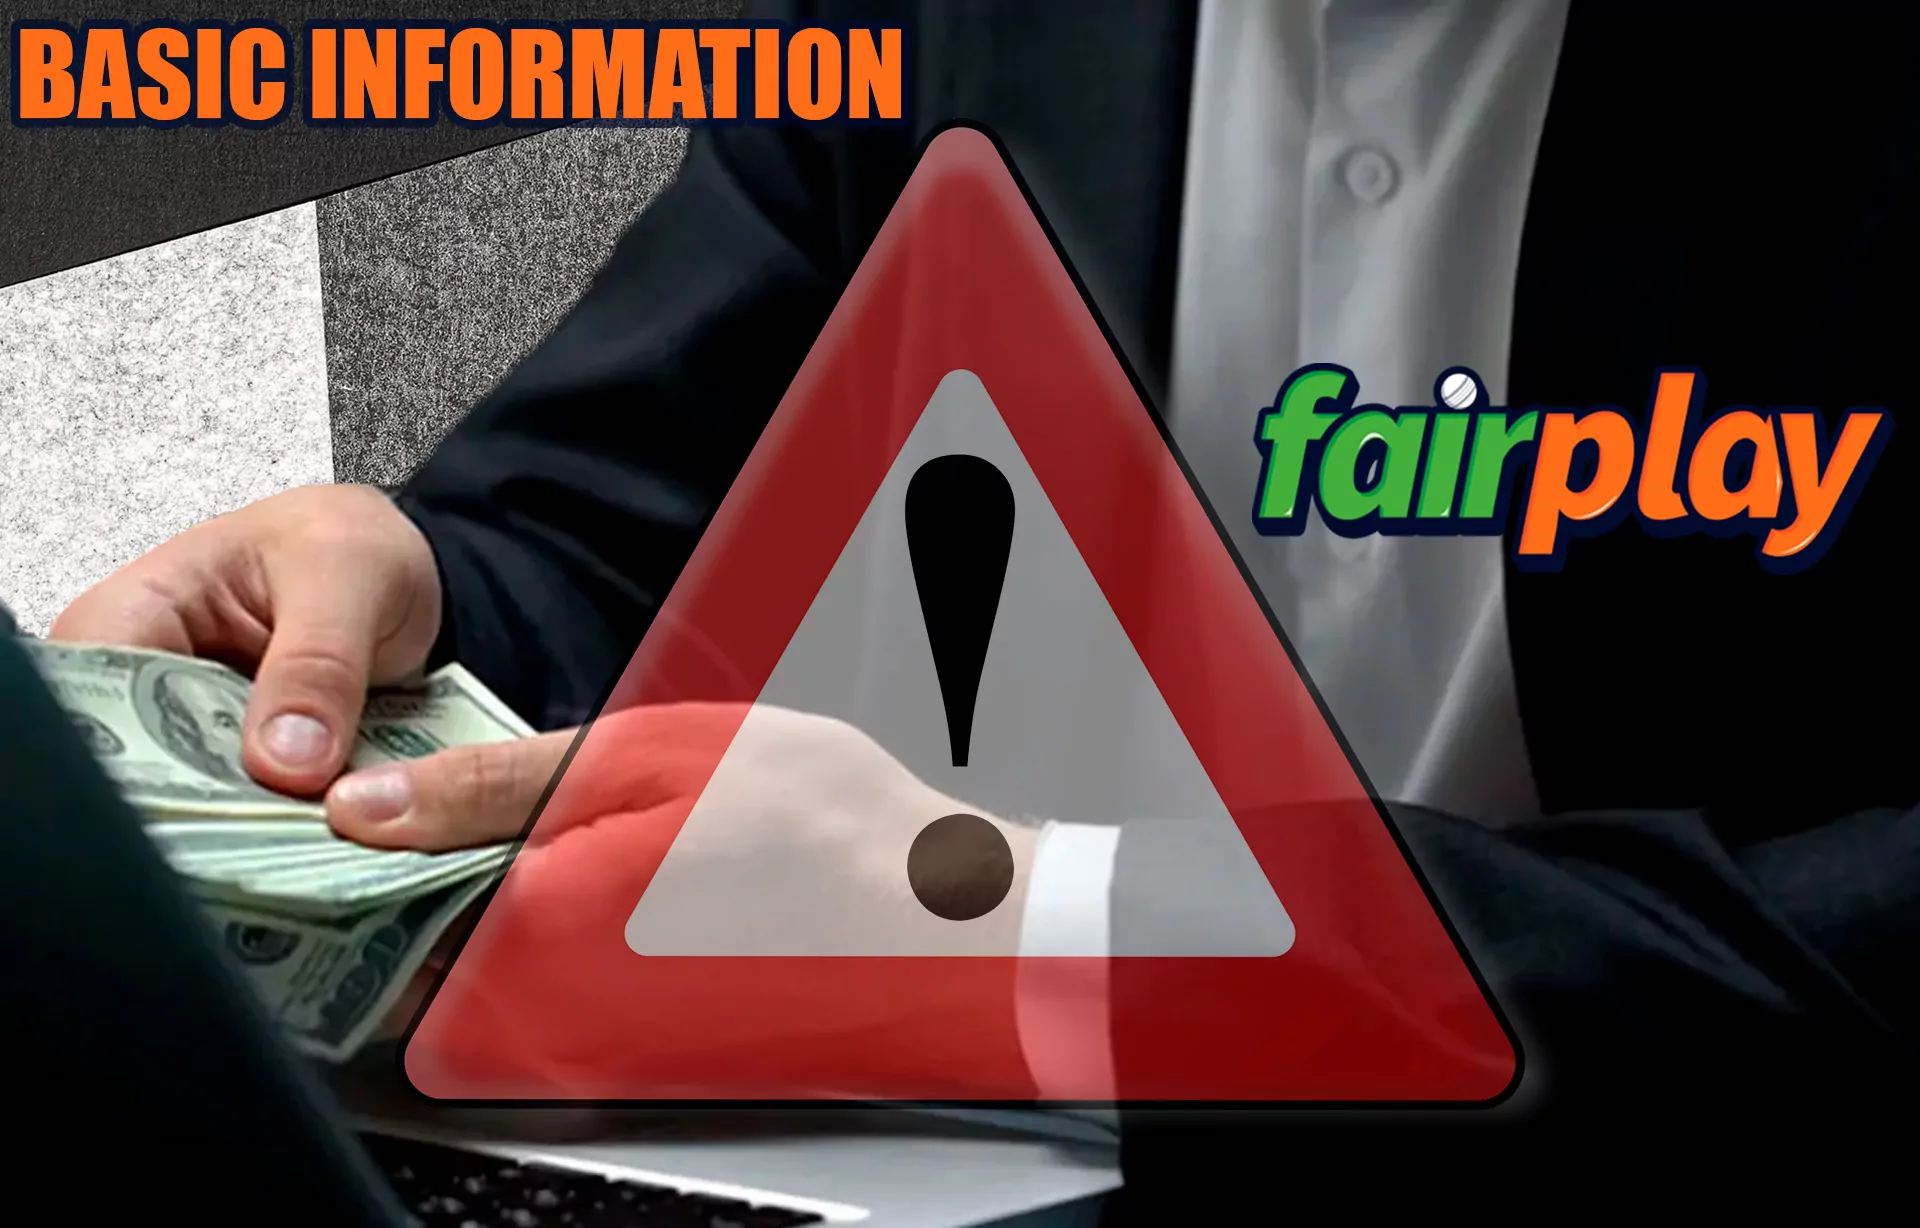 Please read the information on how to safely place bets on Fairplay and avoid losing money without control.